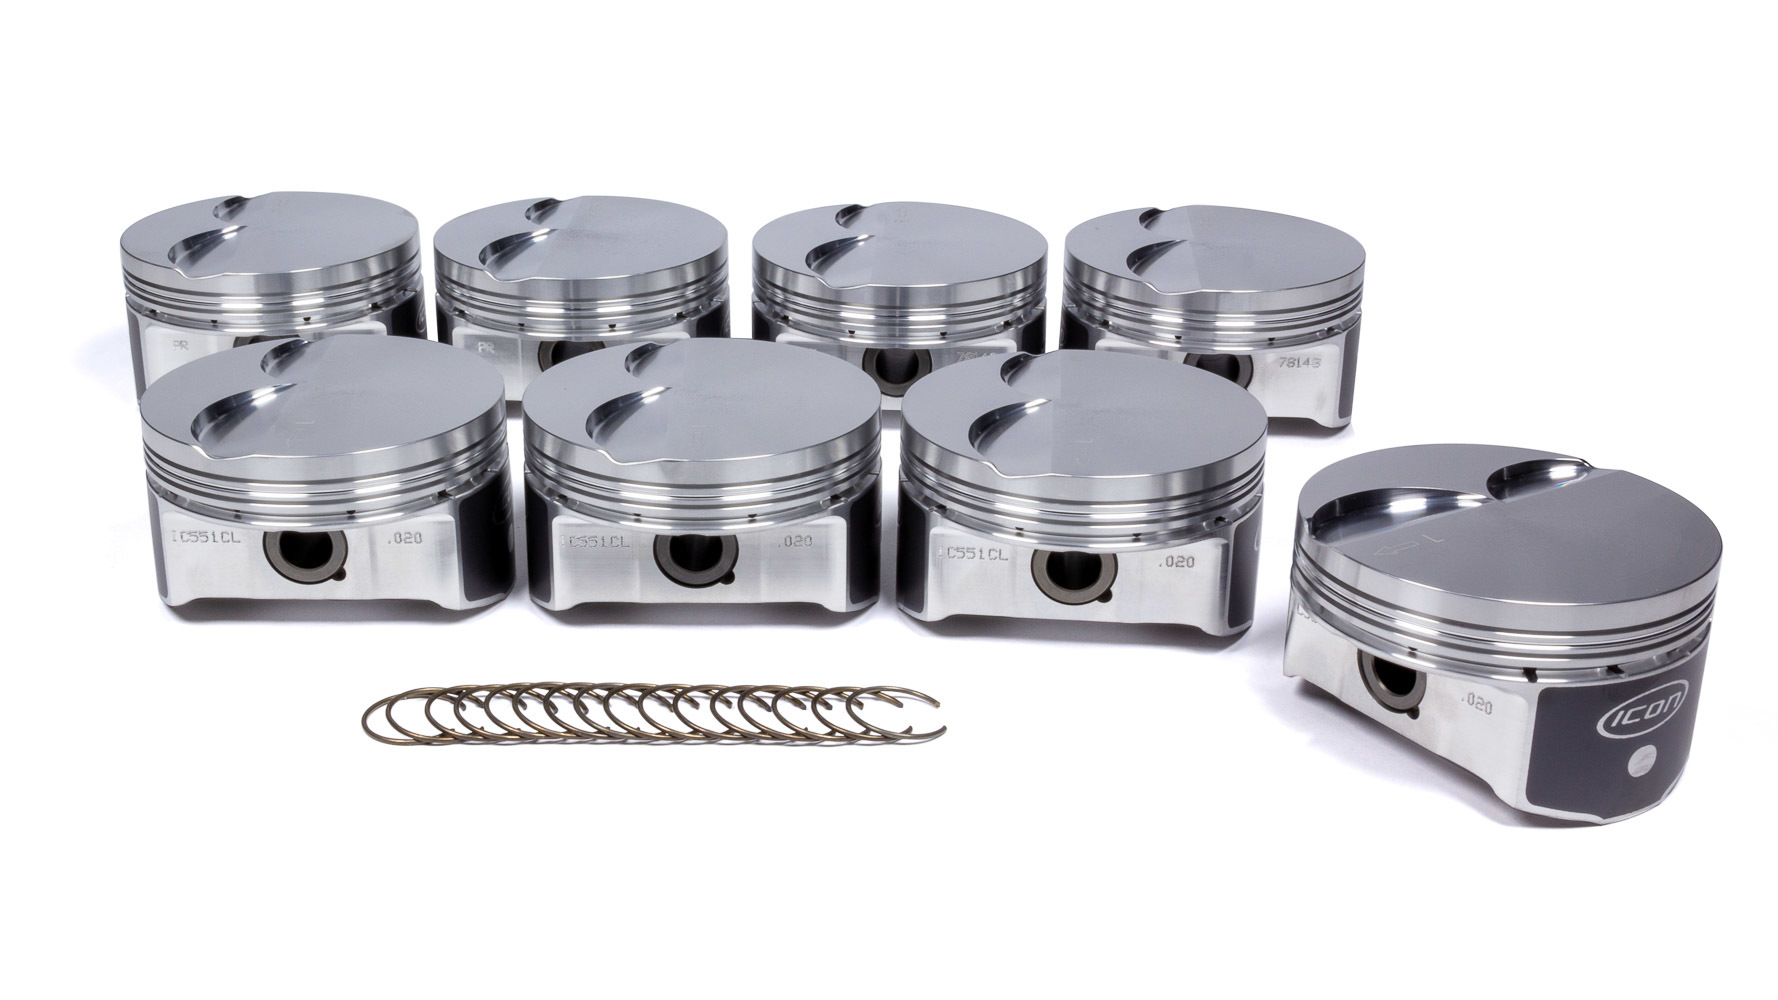 Icon Pistons IC551C.020 Piston, Premium Forged, Forged, 4.020 in Bore, 1.2 x 1.2 x 3.0 mm Ring Groove, Minus 4.00 cc, GM LS-Series, Set of 8